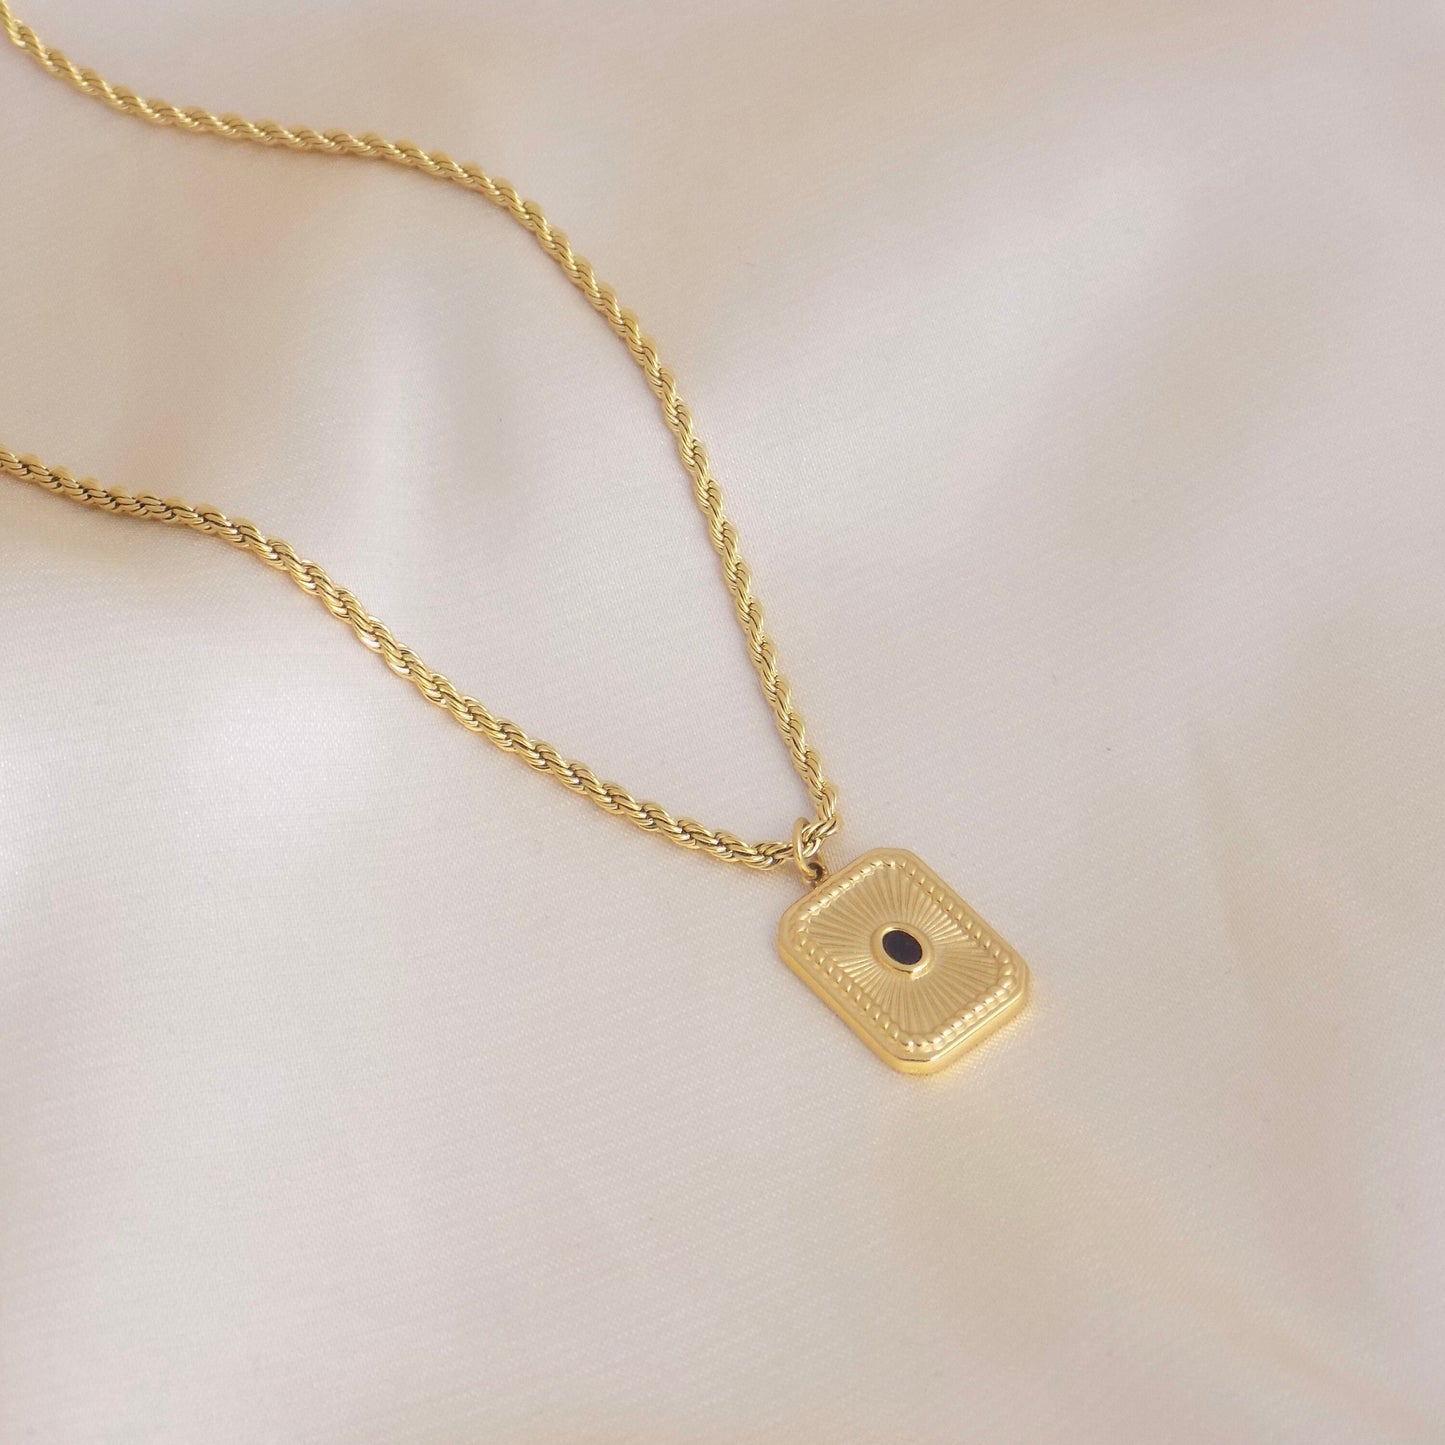 18K Gold Stainless Steel Tag Necklace on Rope Chain, Minimalist Trendy Layering Rectangle Charm, M6-115